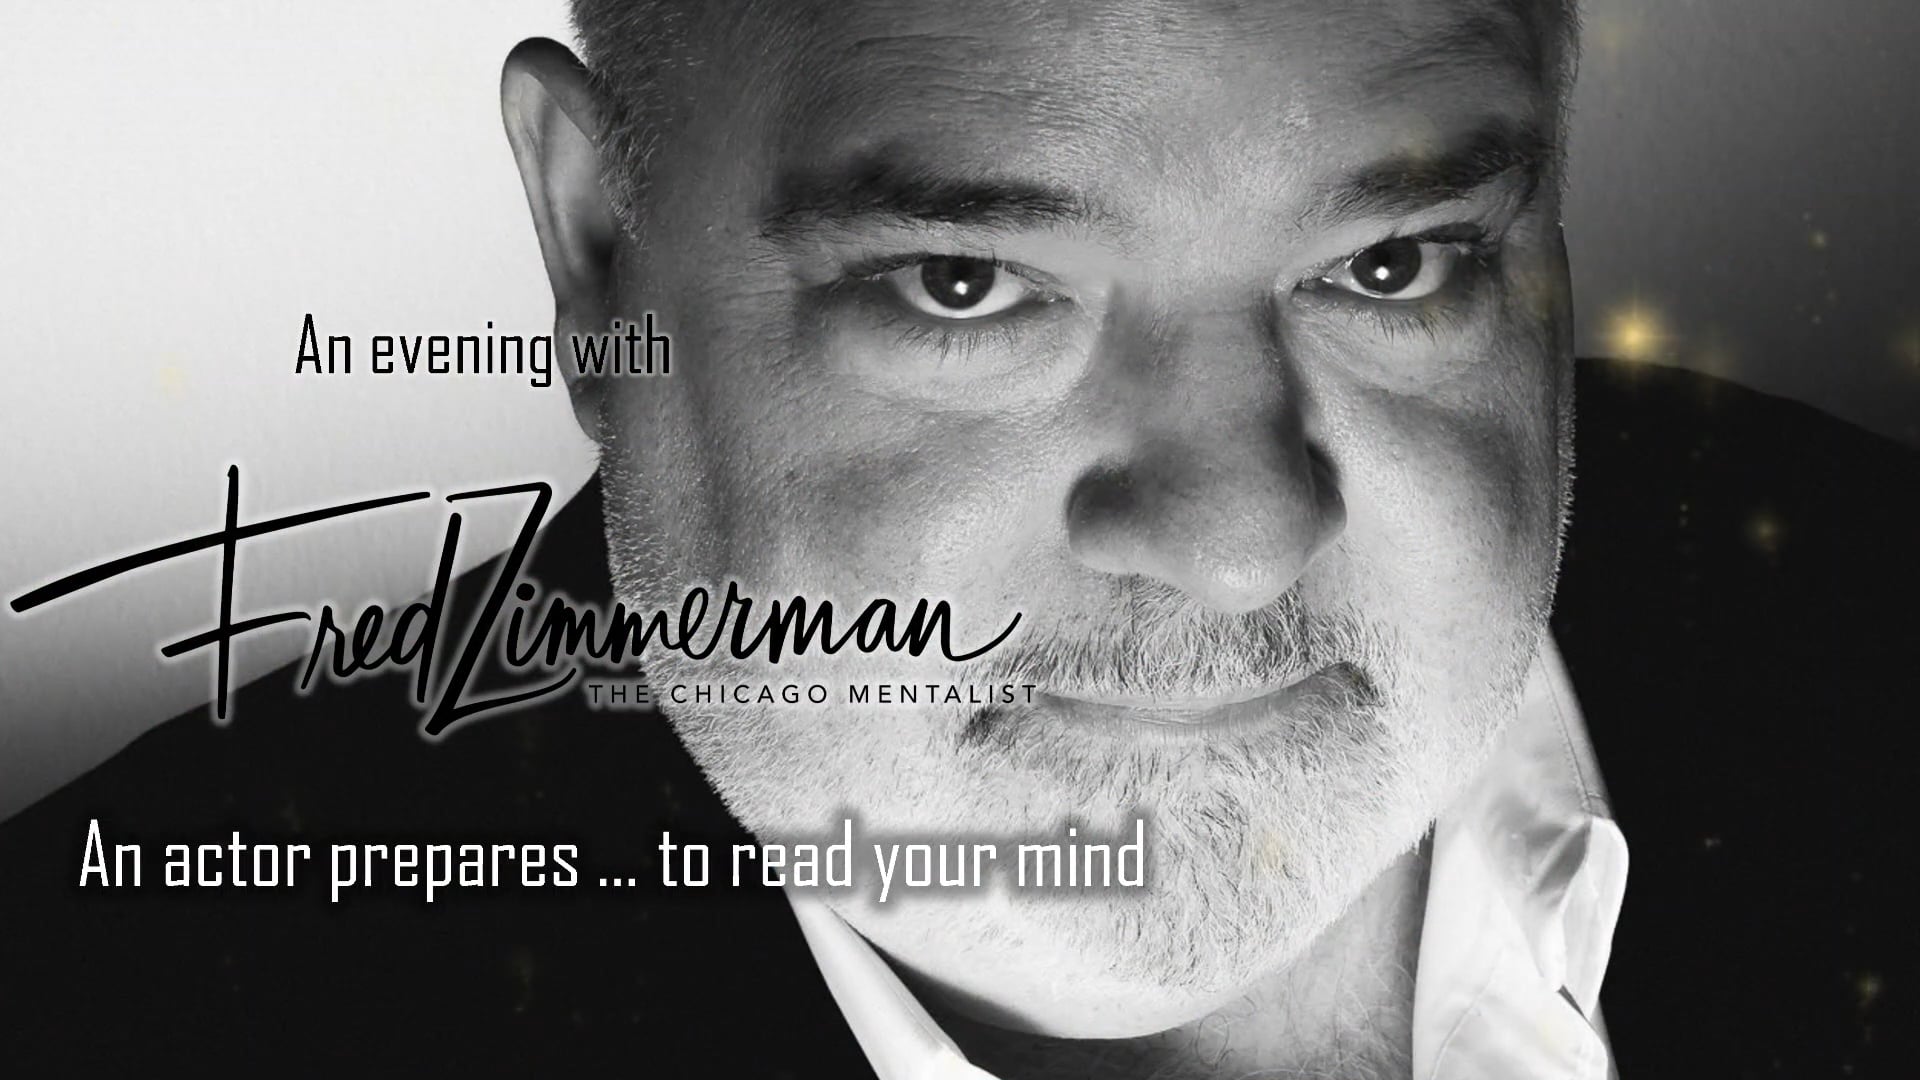 Promotional video thumbnail 1 for An Evening with Fred Zimmerman | The Chicago Mentalist